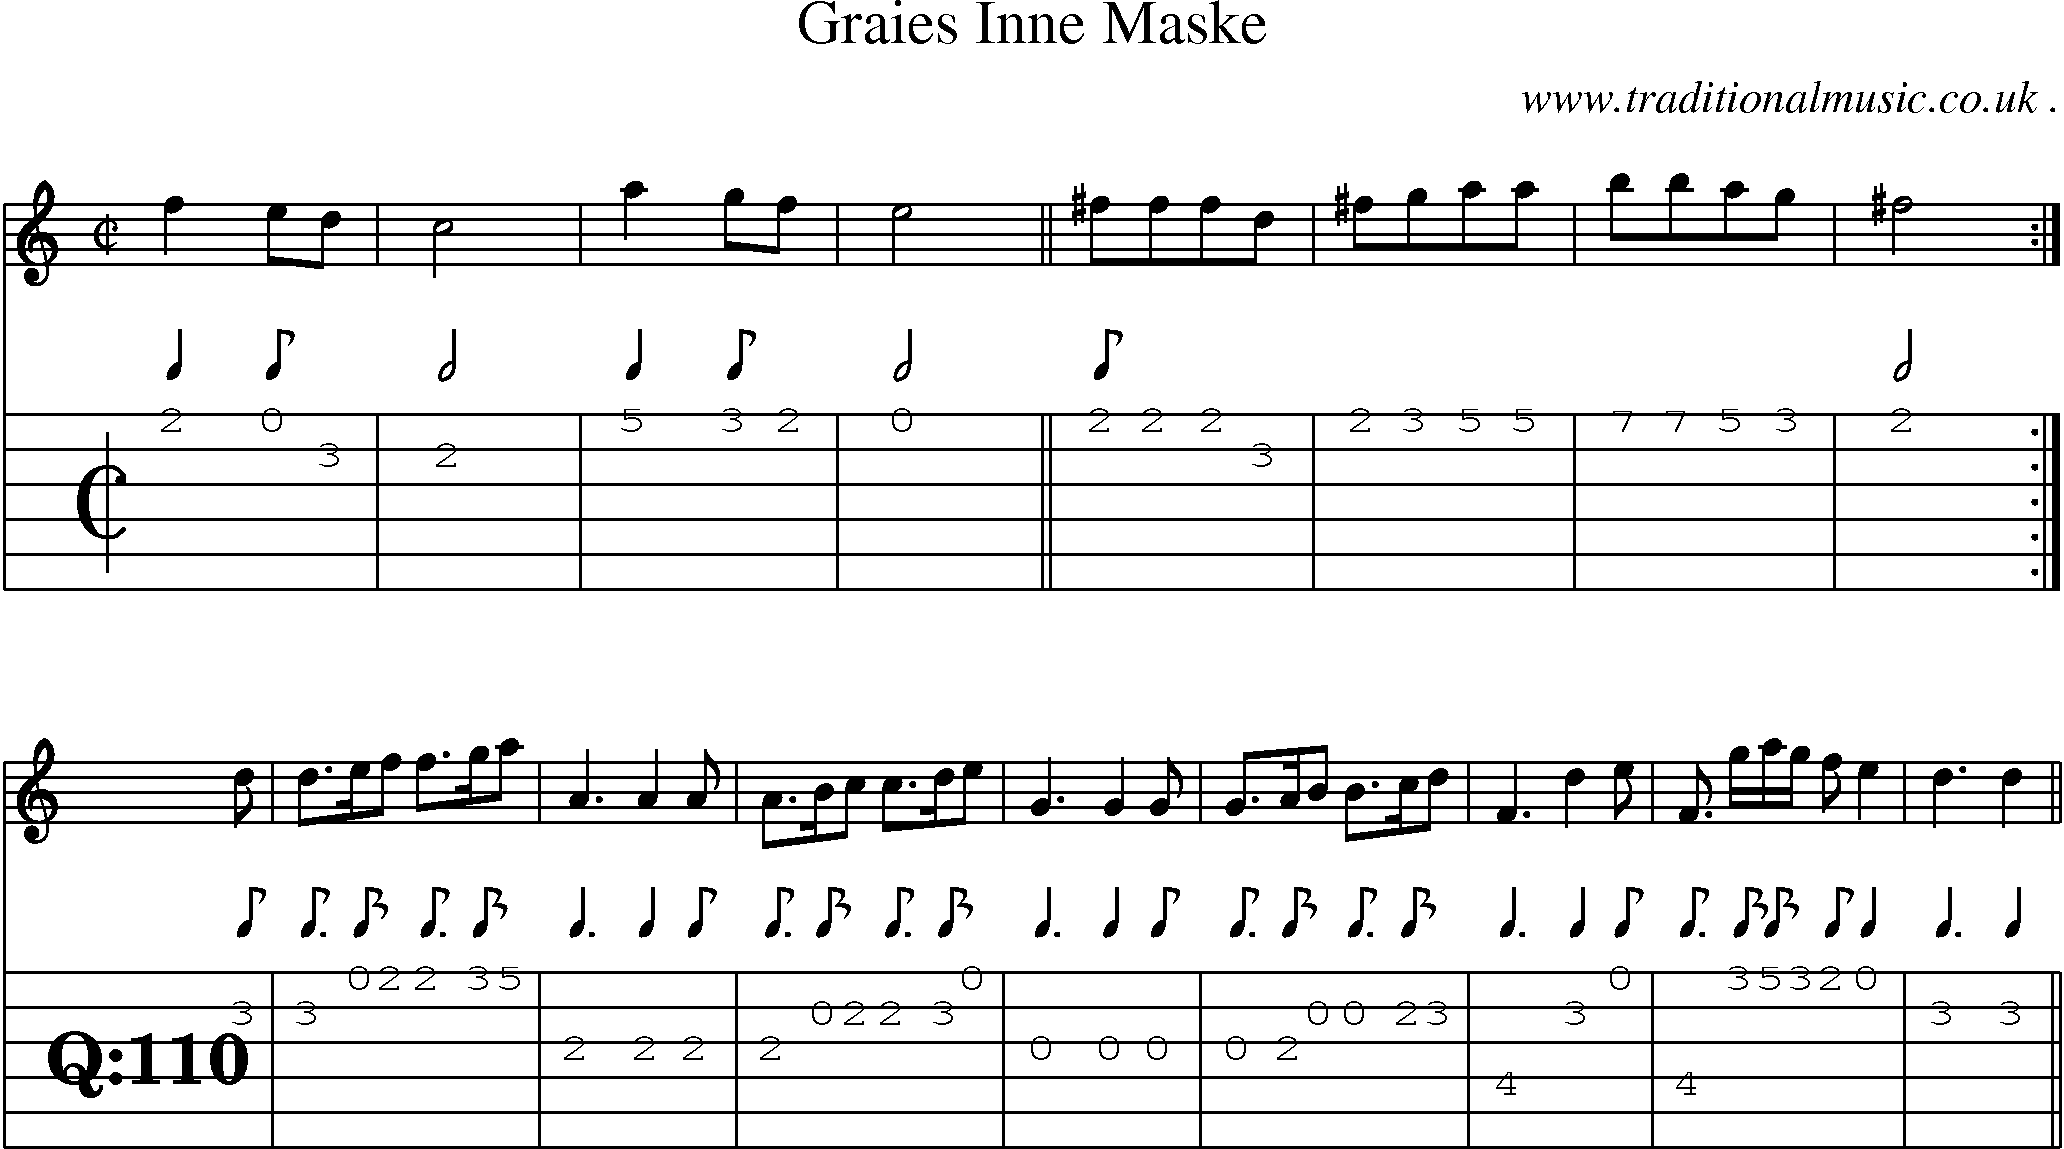 Sheet-music  score, Chords and Guitar Tabs for Graies Inne Maske